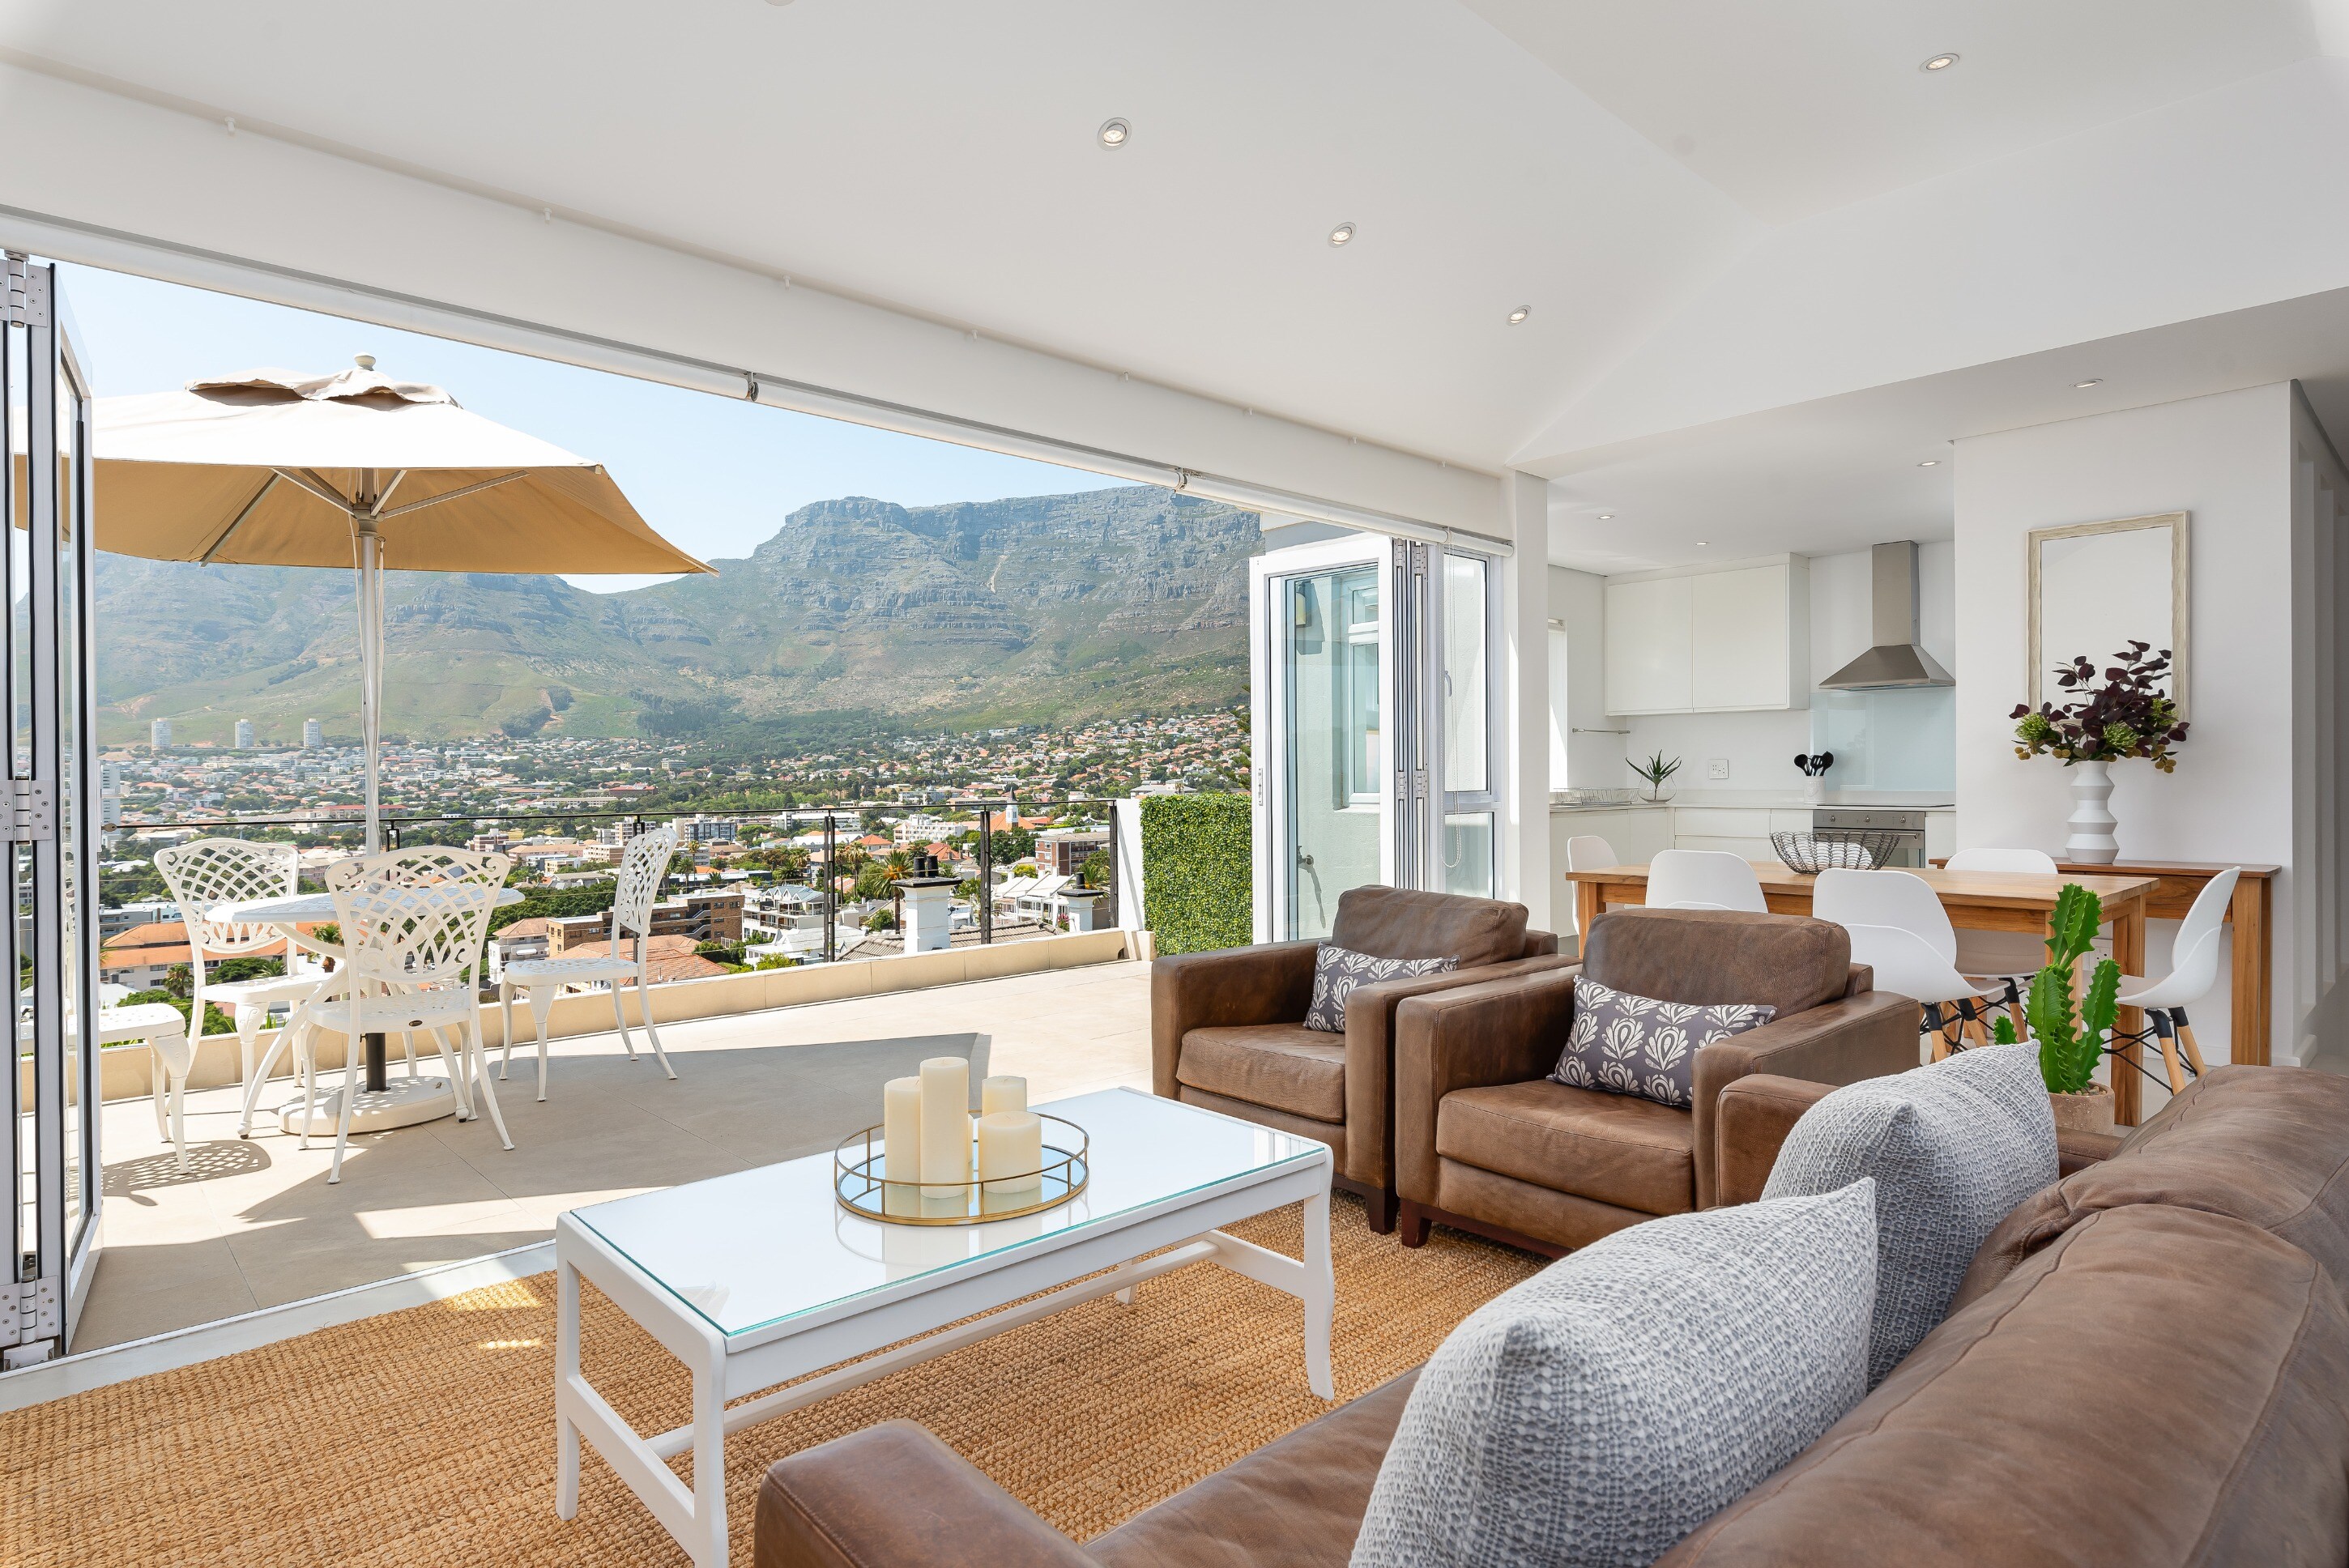 Property Image 1 - Bright Tranquil Apartment with Picturesque Mountain Views